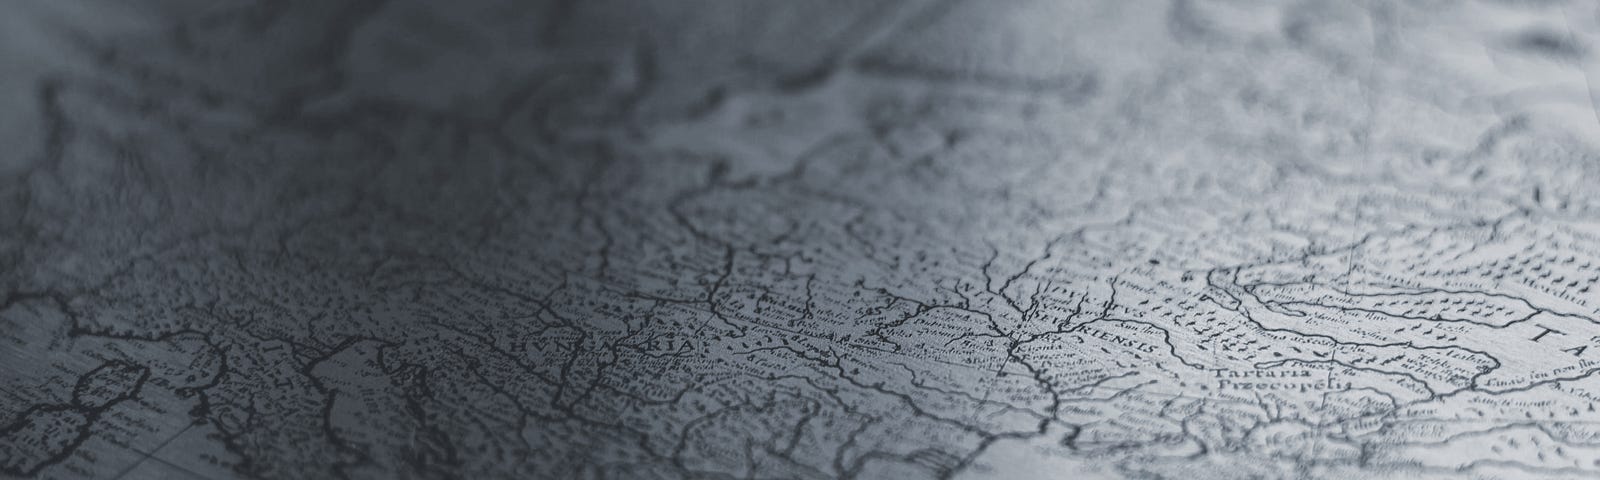 Close-up of a grayscale map.